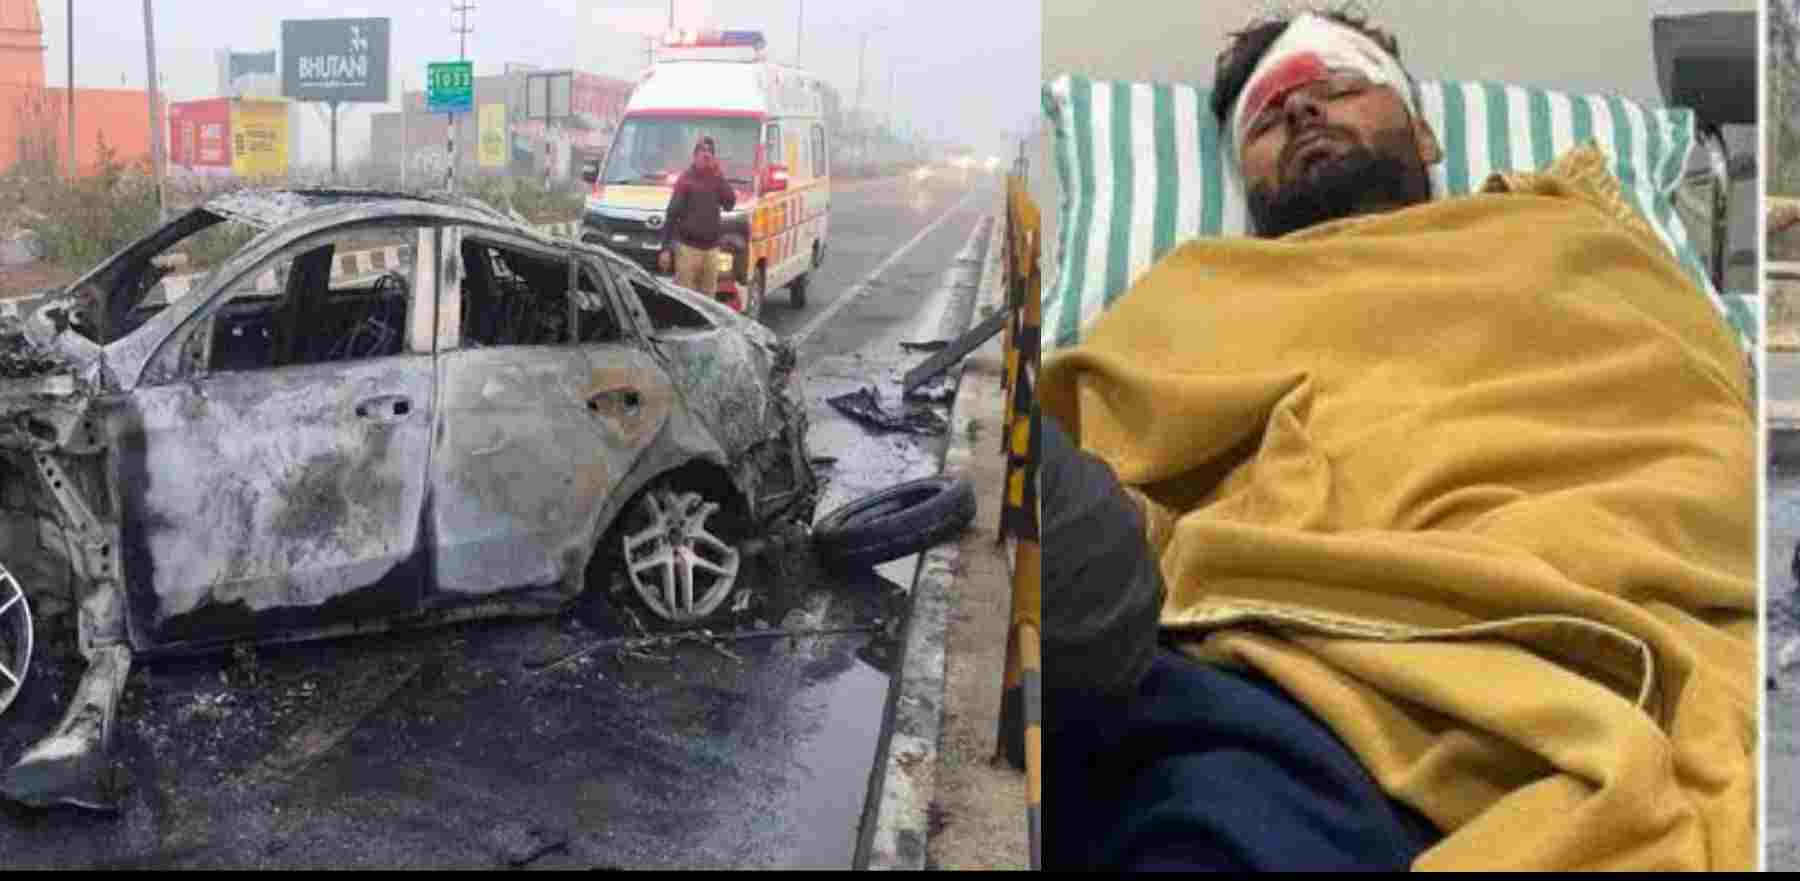 Uttarakhand news: Indian cricketer Rishabh Pant car caught fire on road accident in roorkee, badly injured. Rishabh pant road accident.